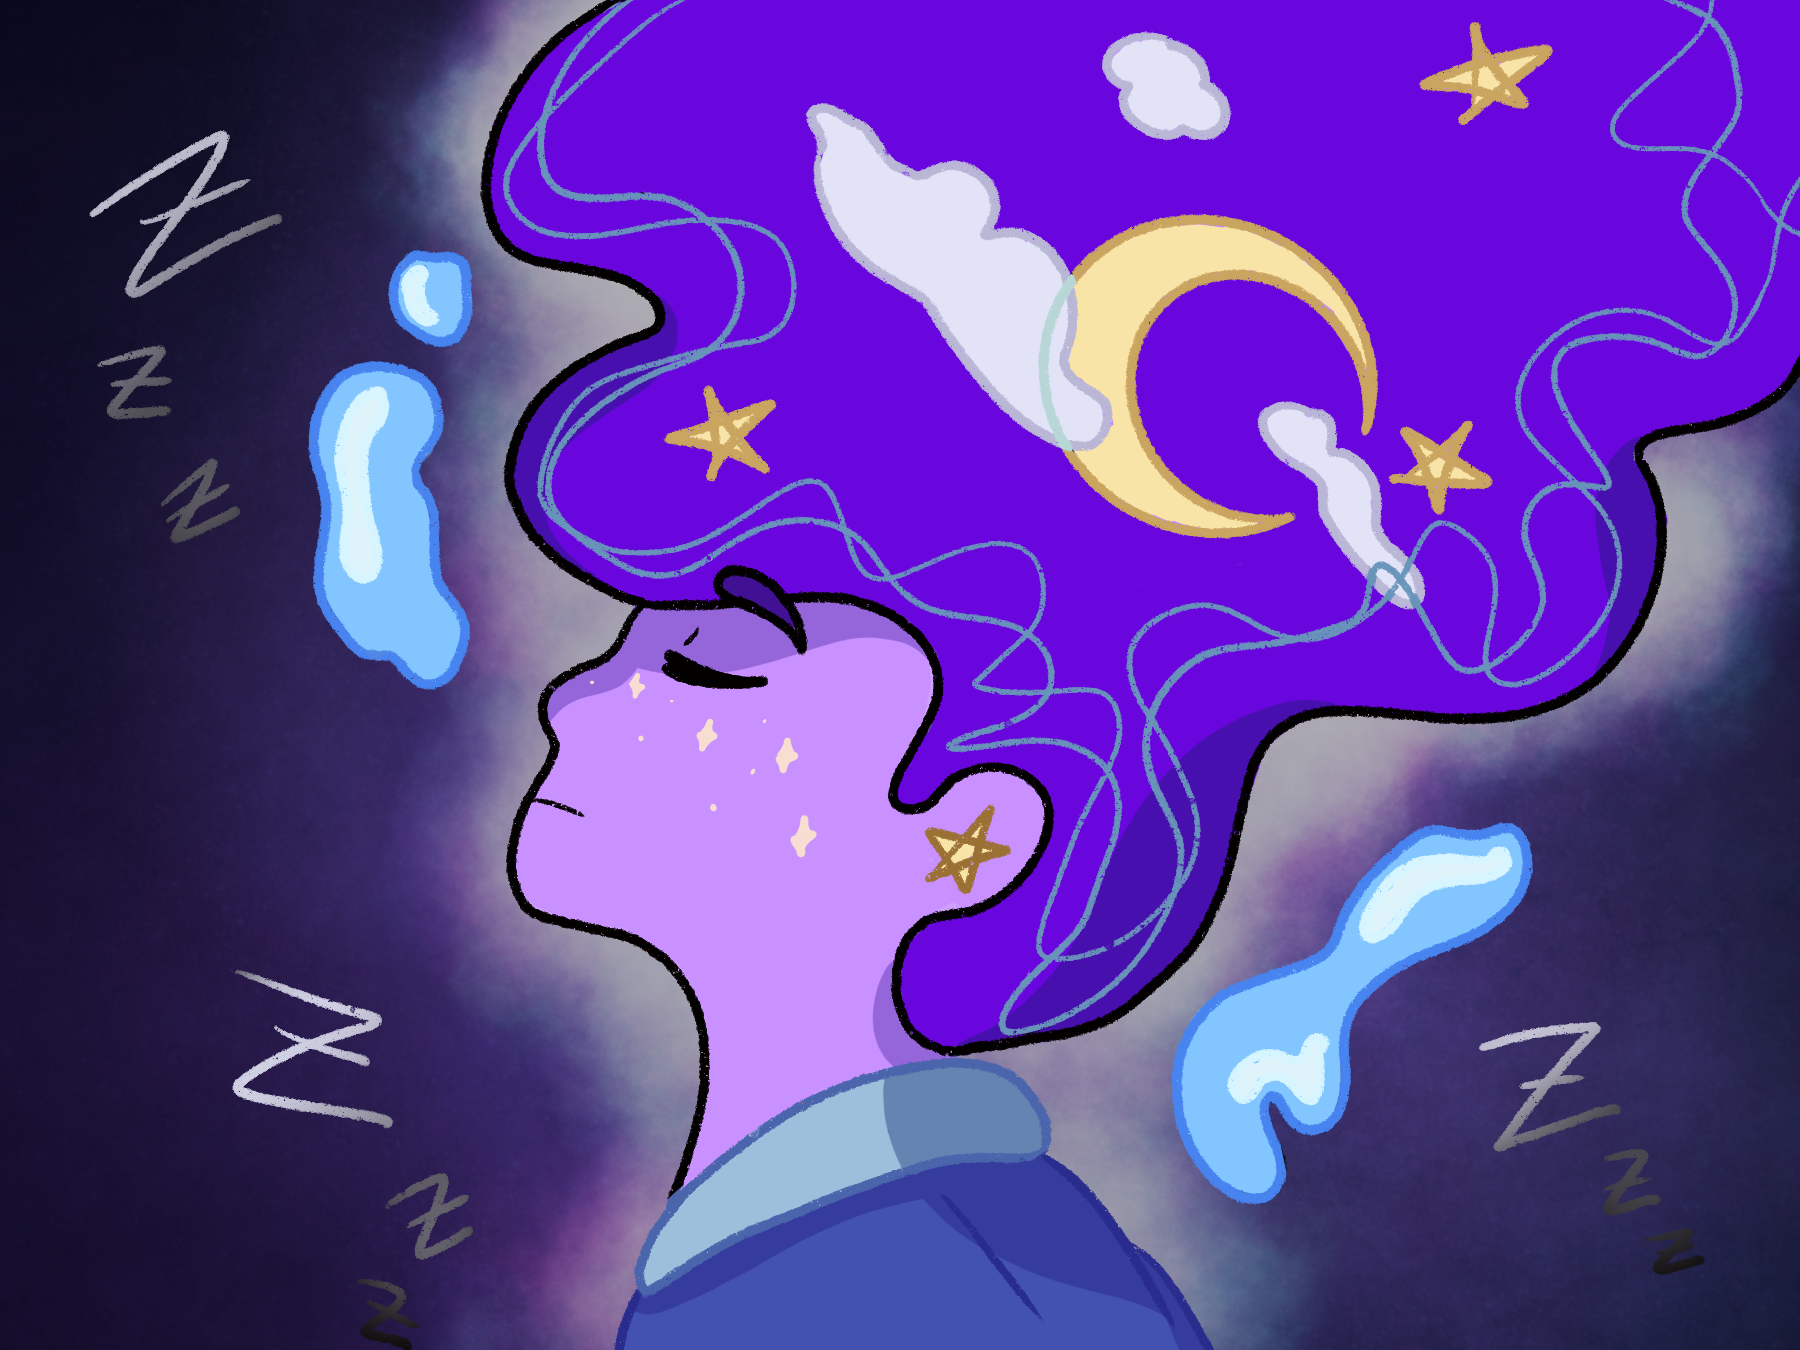 In an article about dream interpretation, a purple-haired person sleeps at night imagining clouds and a crescent moon.